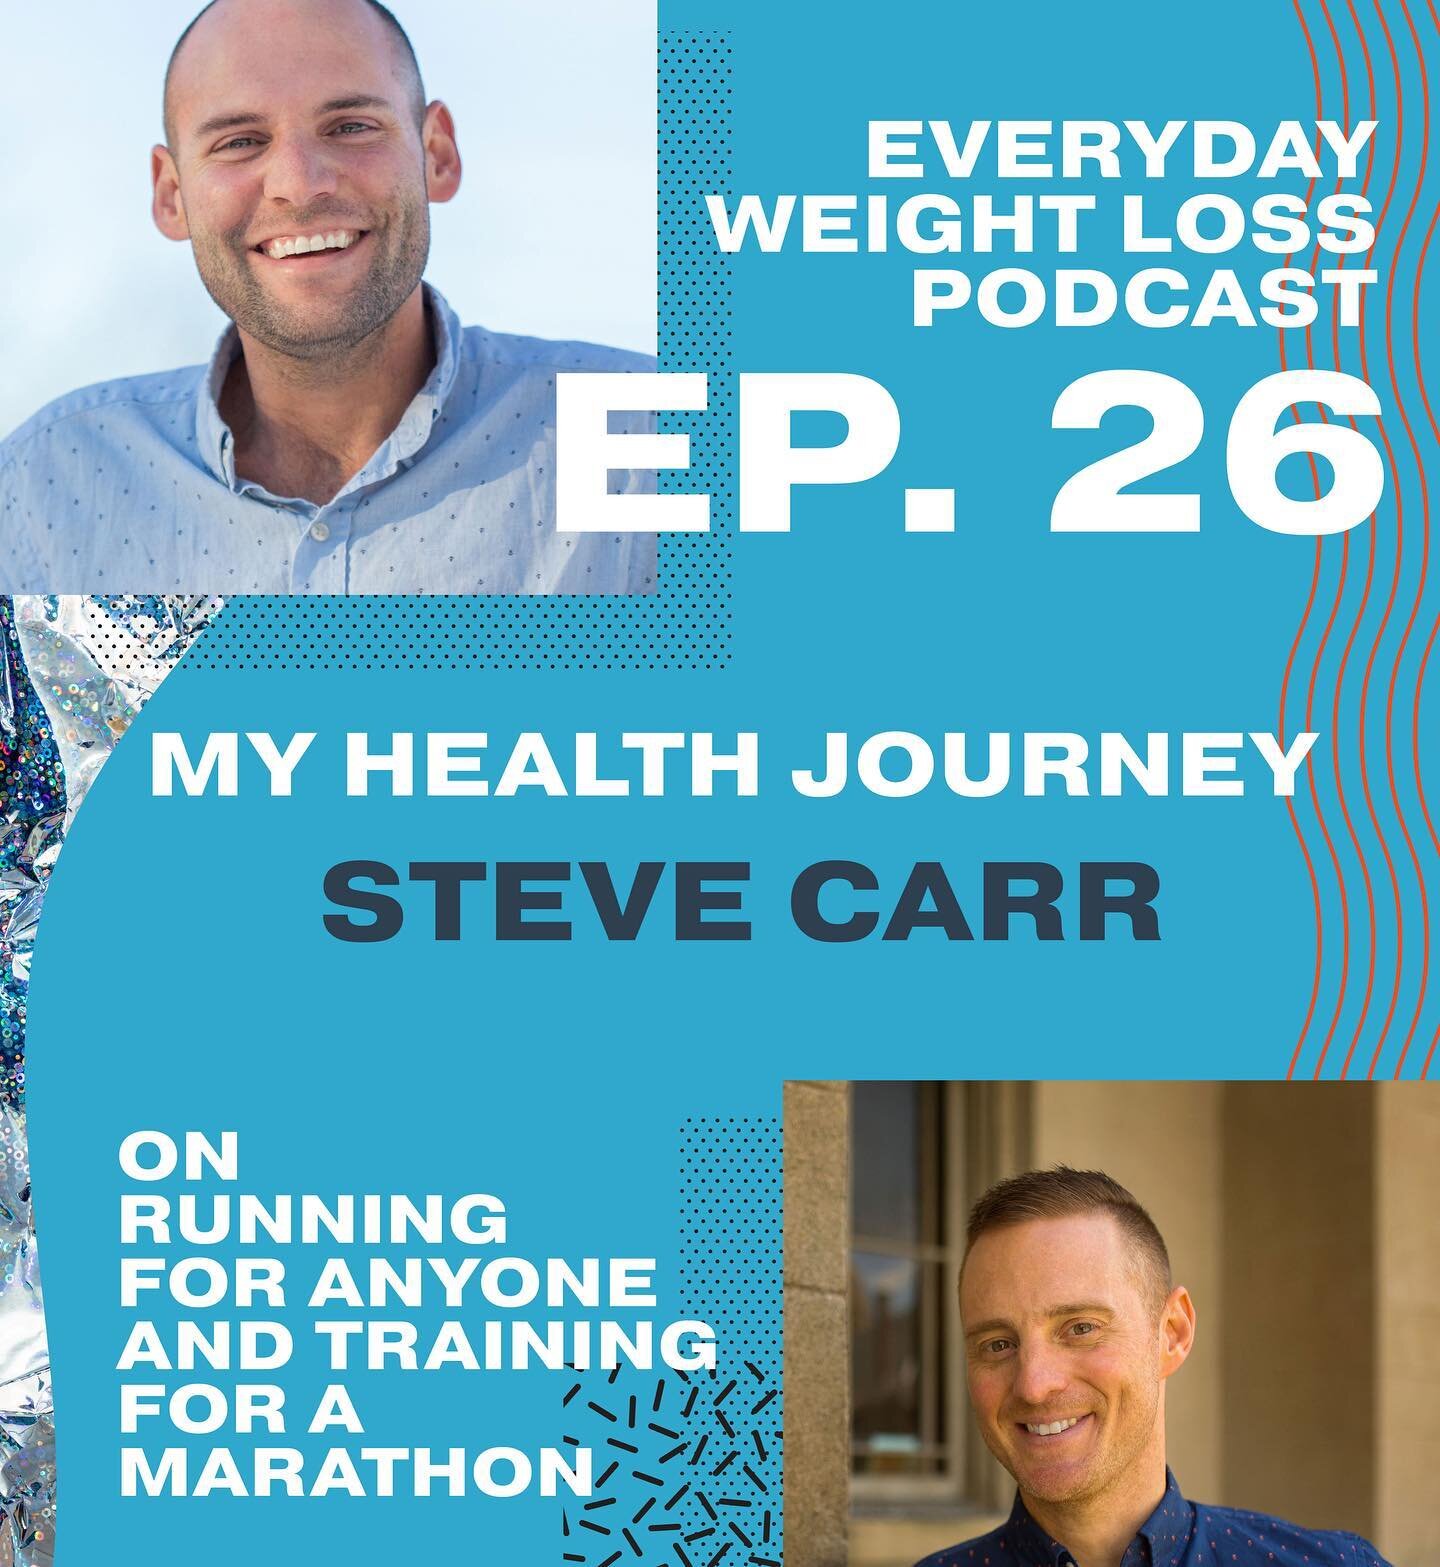 My friend @danielkinglive has an inspiring story of dramatic weight loss and has a podcast to help people interested in a similar journey. He asked if I'd share my experience as a runner and we discussed how to pick up this healthy habit. This episod